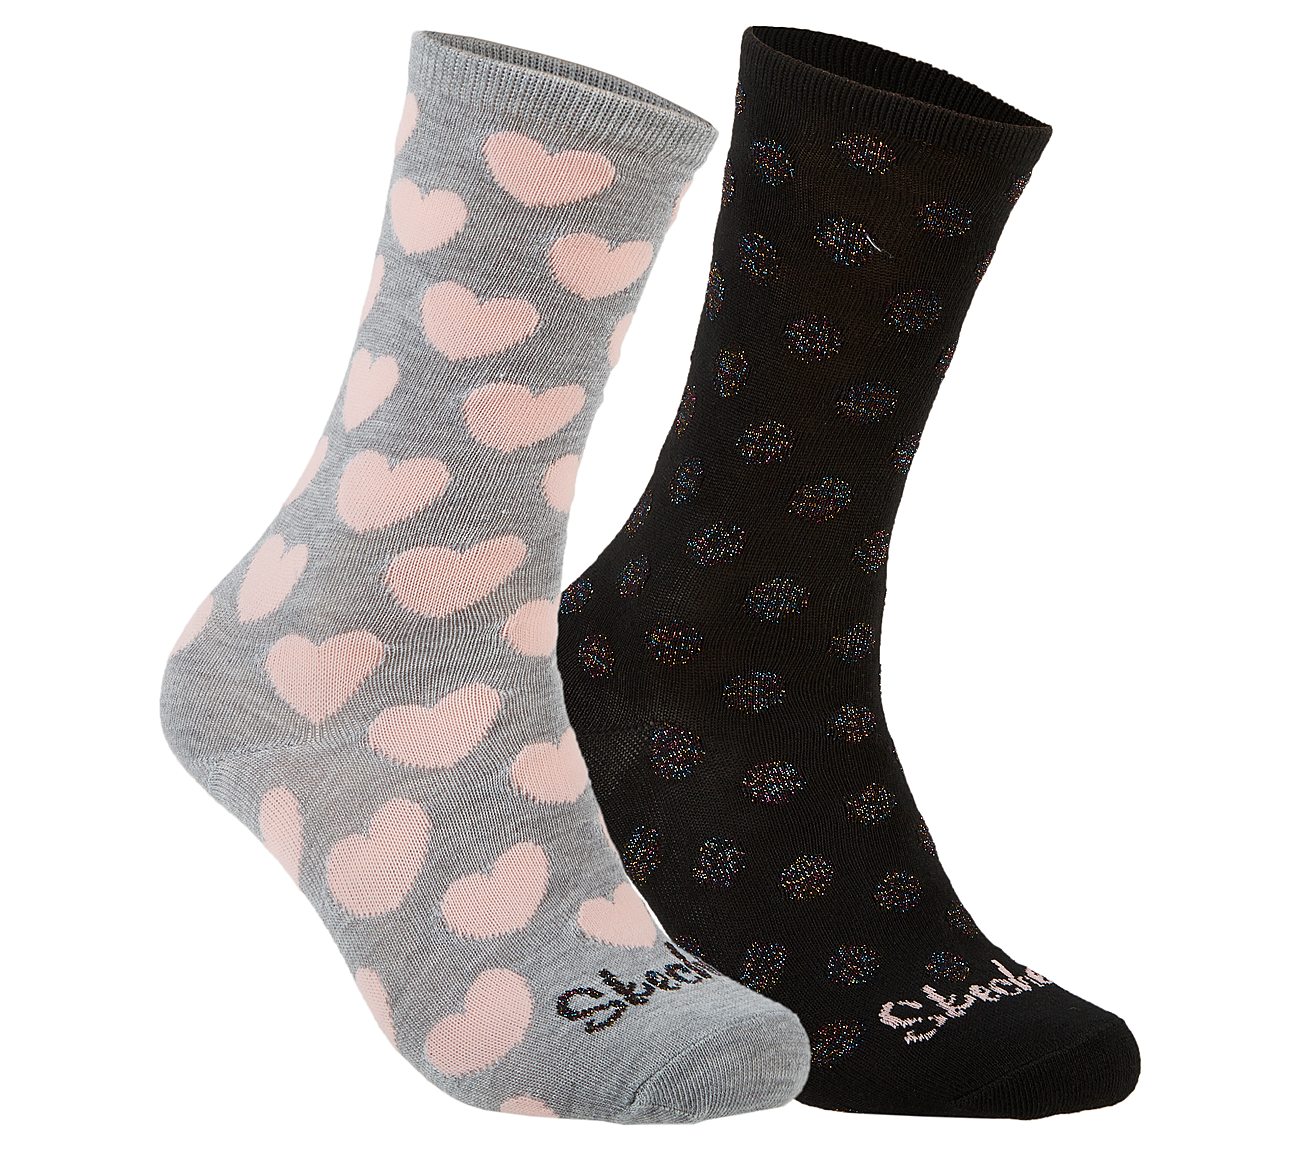 Buy SKECHERS 2 Pack Super Soft Fashion Crew Socks Accessories Shoes